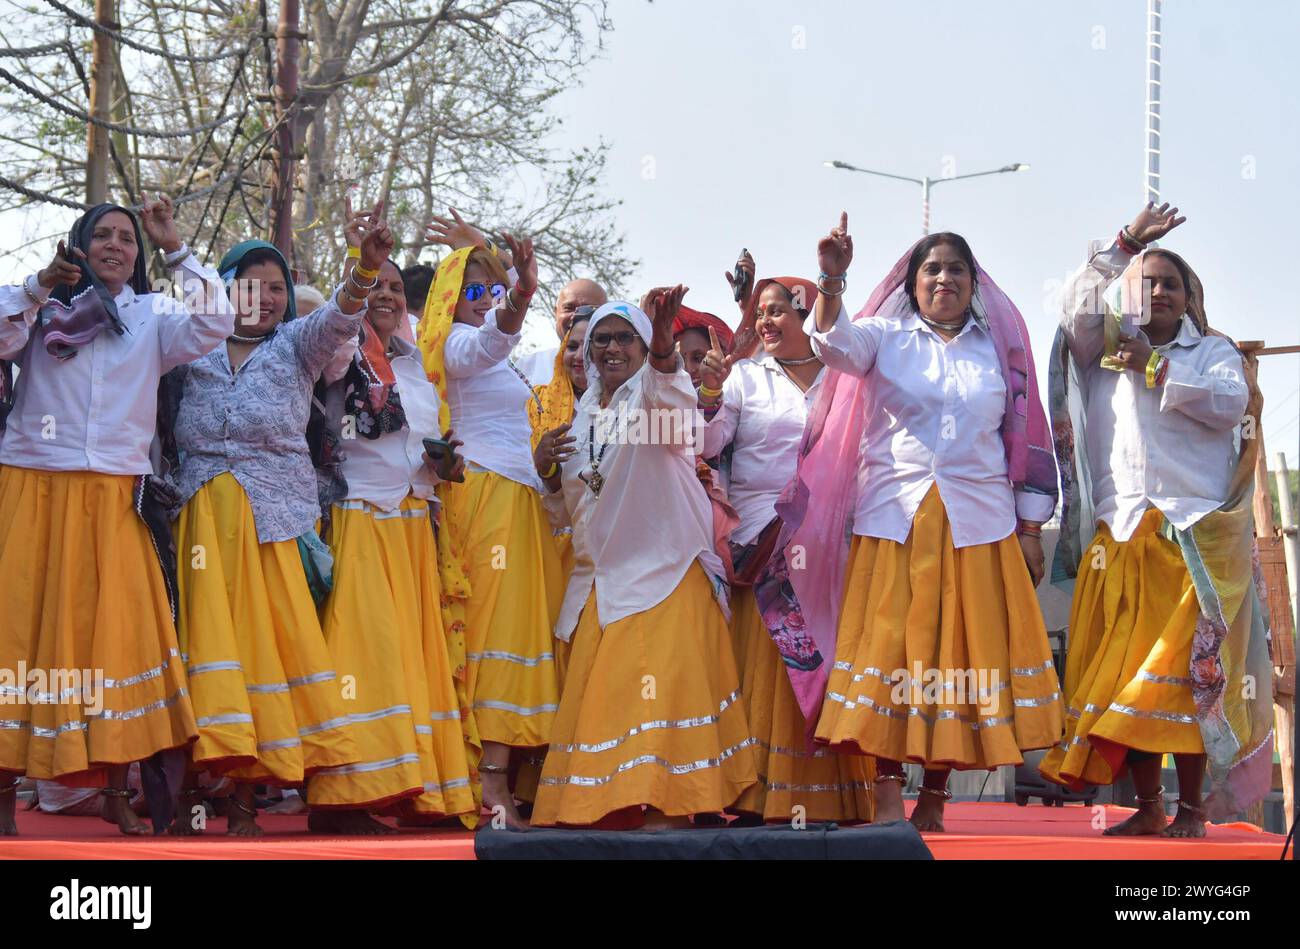 GHAZIABAD, INDIA - APRIL 6: Artists in the Prime Minister's road show on Ghaziabad Ambedkar Road, women workers dancing and singing on April 6, 2024 in Ghaziabad, India. Holding the party symbol 'lotus', PM Modi waved at the cheering crowd who greeted the four leaders with the slogans of 'Abki baar 400 paar' (400-plus seats for NDA this time), 'Har Har Modi' and 'Jai Shri Ram'. BJP first Lok Sabha election roadshow in Uttar Pradesh, canvassing support for the BJP's Ghaziabad candidate Atul Garg, who has been fielded in place of two-time MP and Union minister V K Singh. (Photo by Sakib Ali/Hind Stock Photo